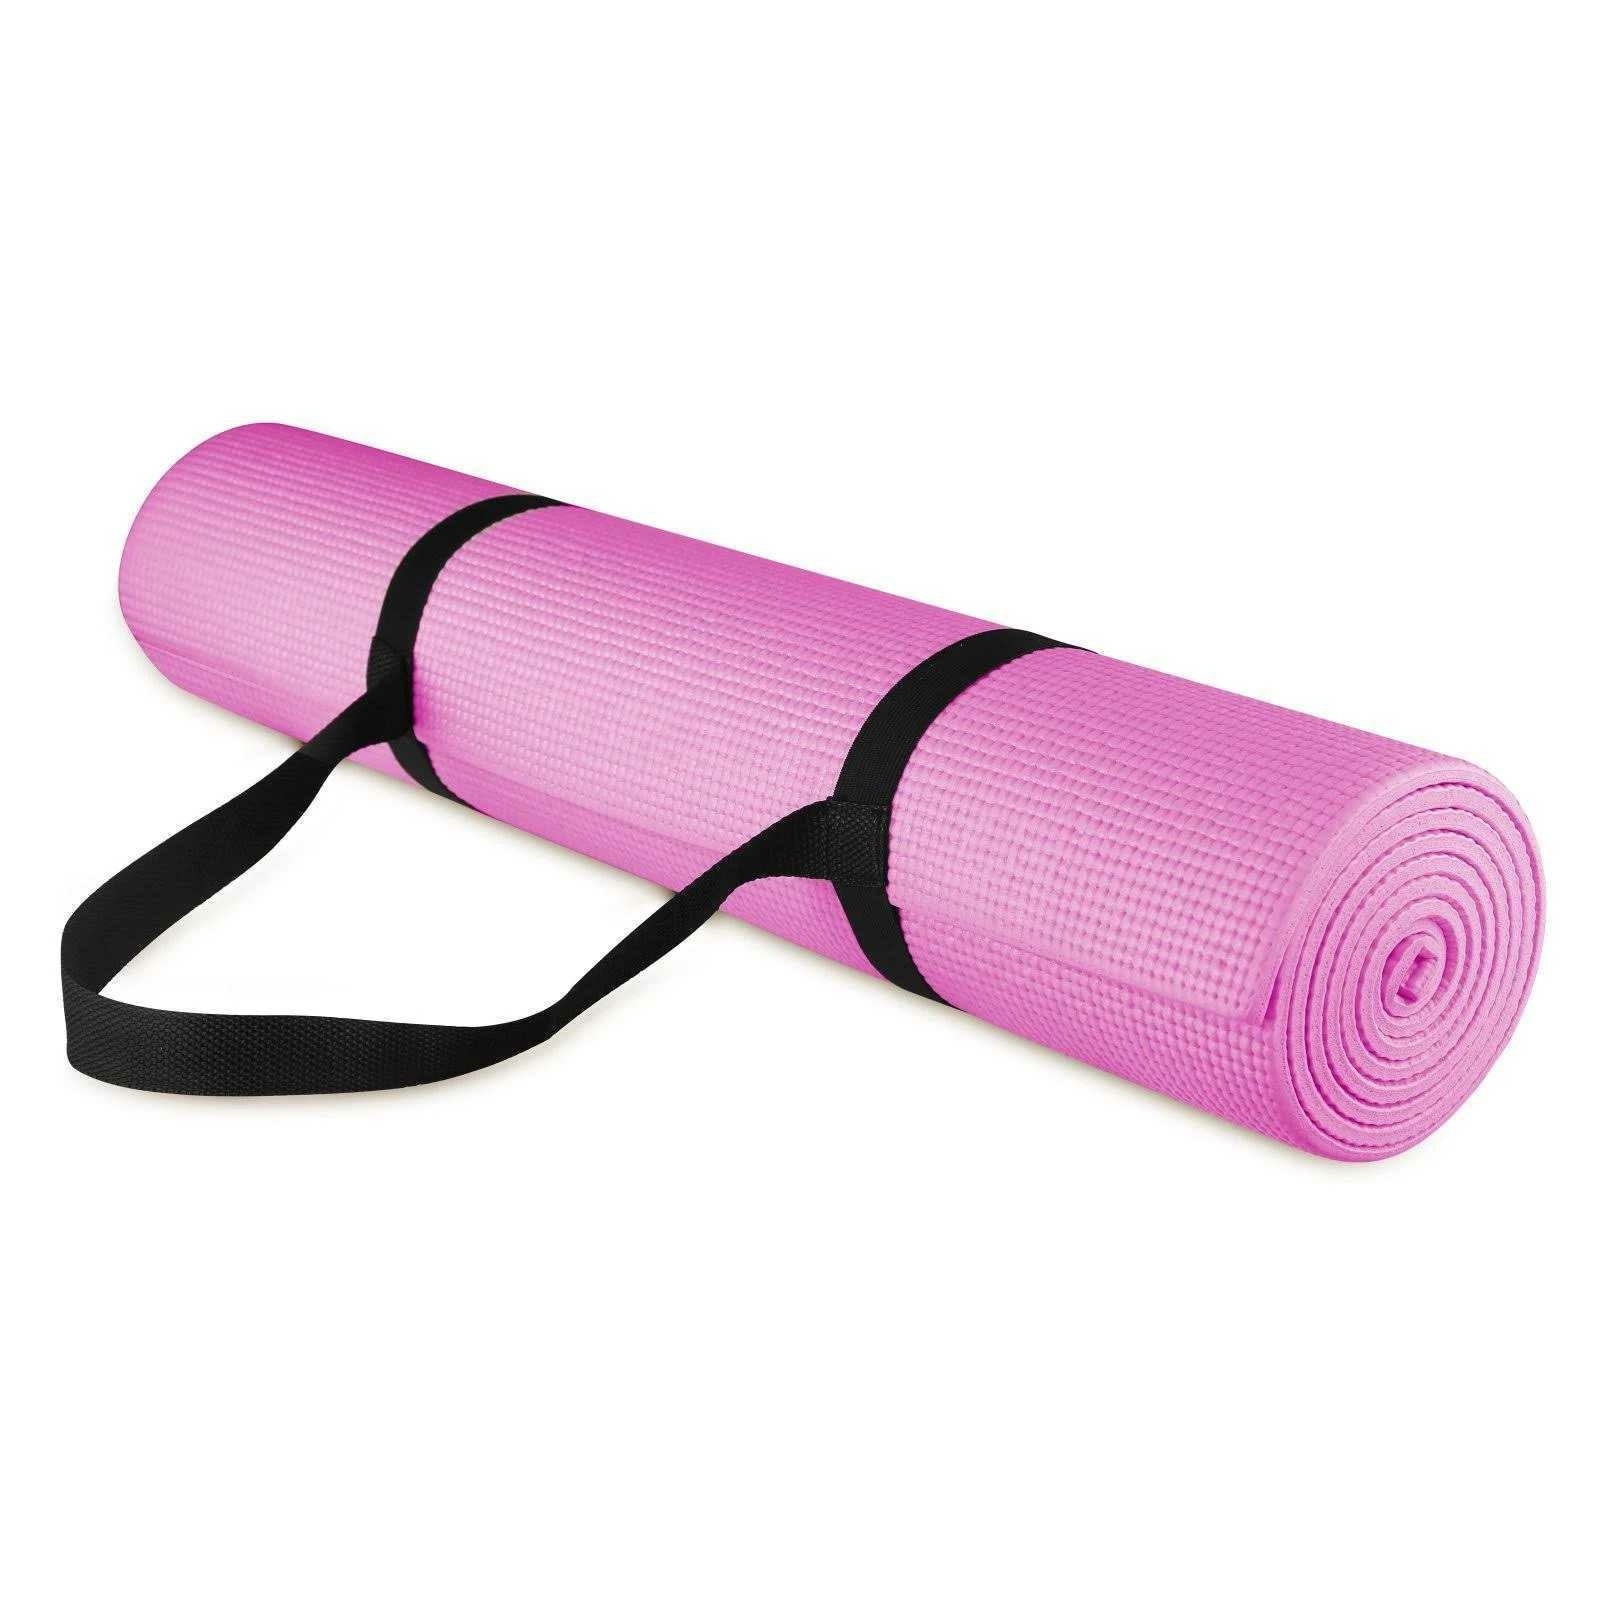 https://ak1.ostkcdn.com/images/products/is/images/direct/a052ad99ea6f8a90133995a05aaf18f24bf70430/BalanceFrom-GoYoga-1-4-Inch-Yoga-Mat.jpg